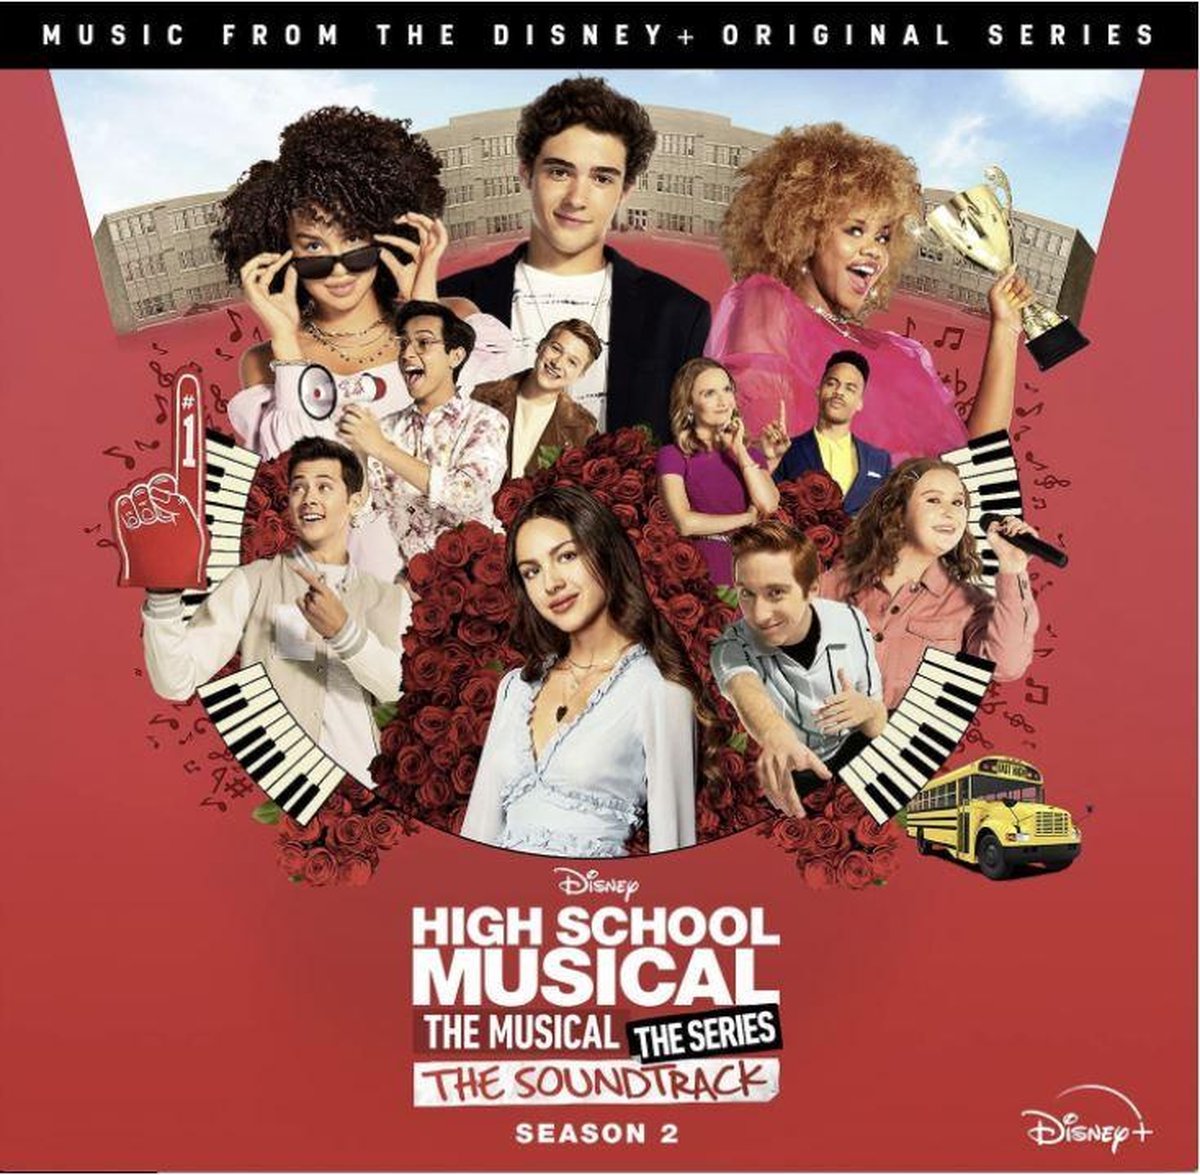 Various Artists - High School Musical: The Musical: The Series 2 (CD) (Original Soundtrack) - various artists